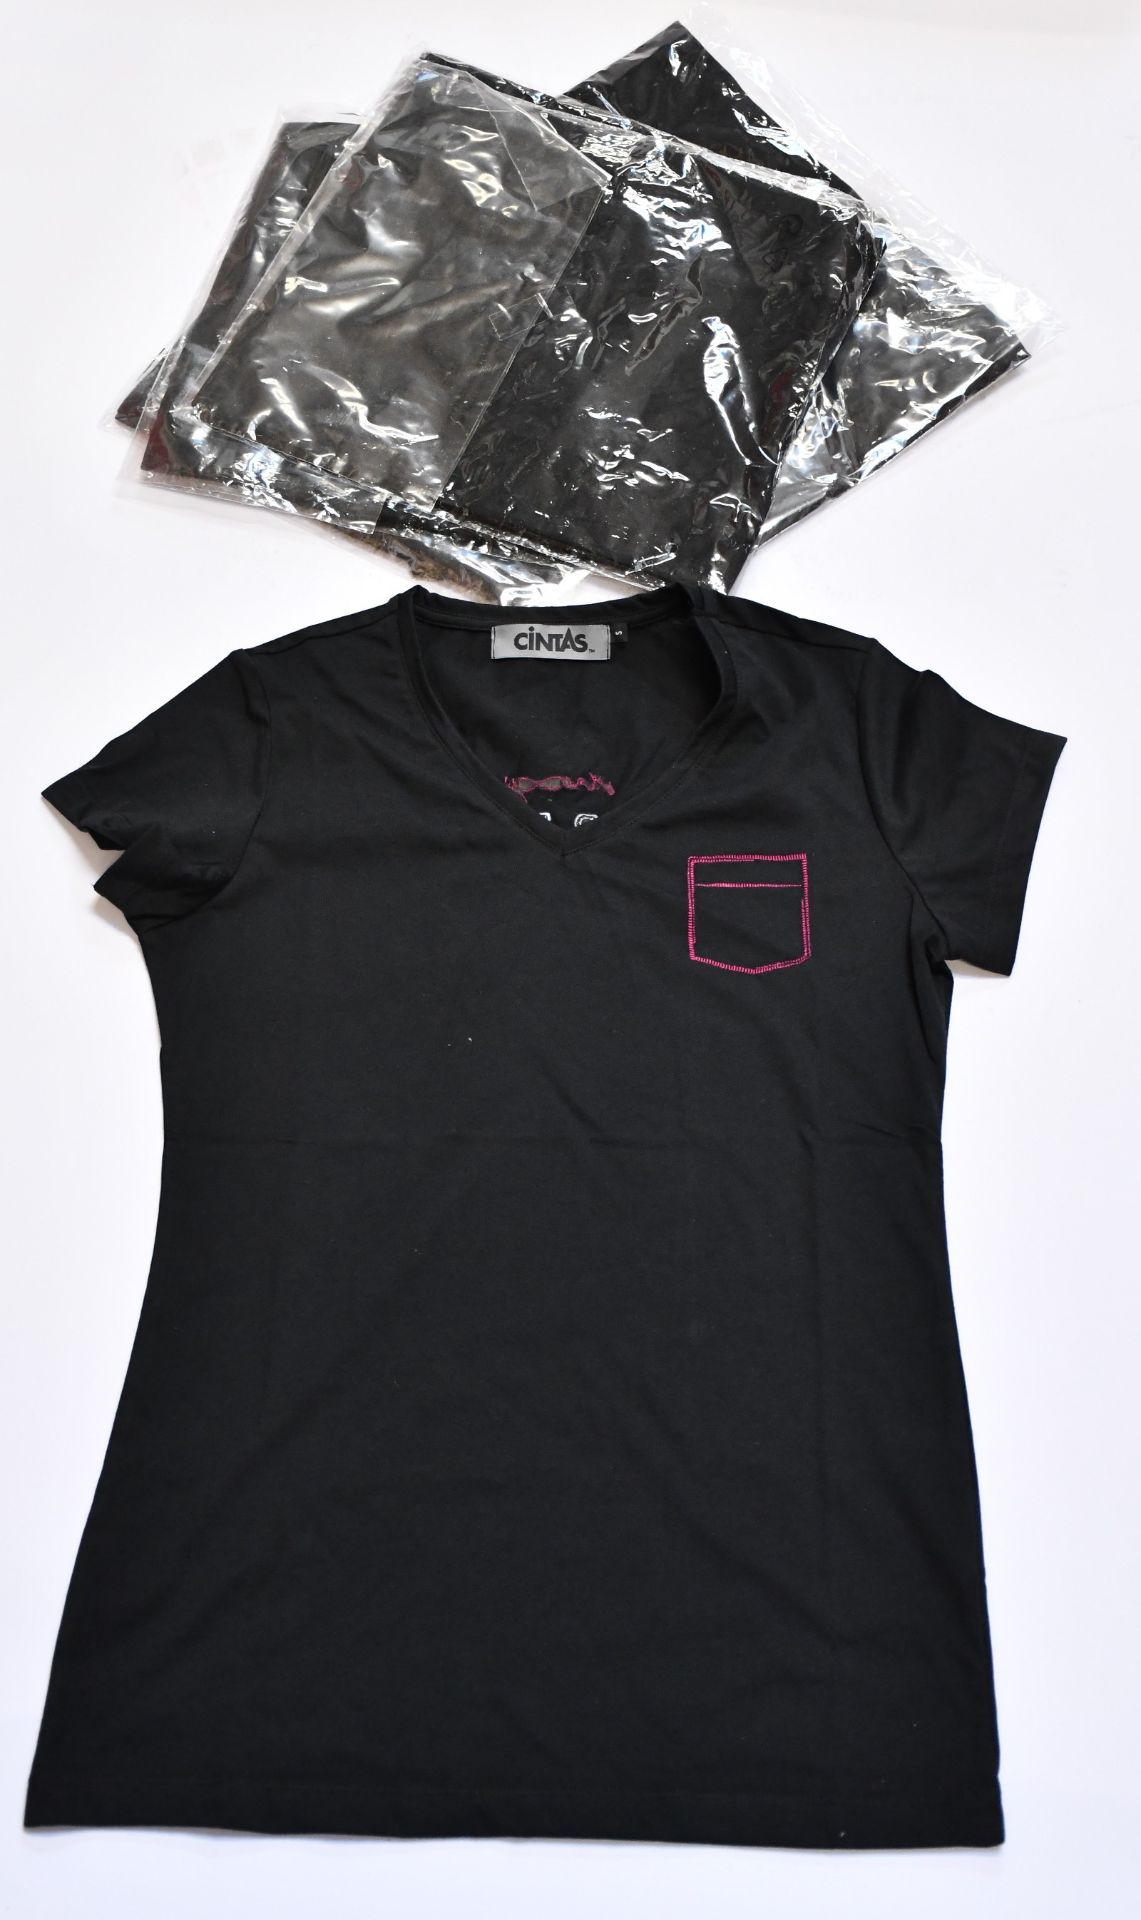 A large quantity of Moxy crew T-shirts in black and white (Assorted sizes).